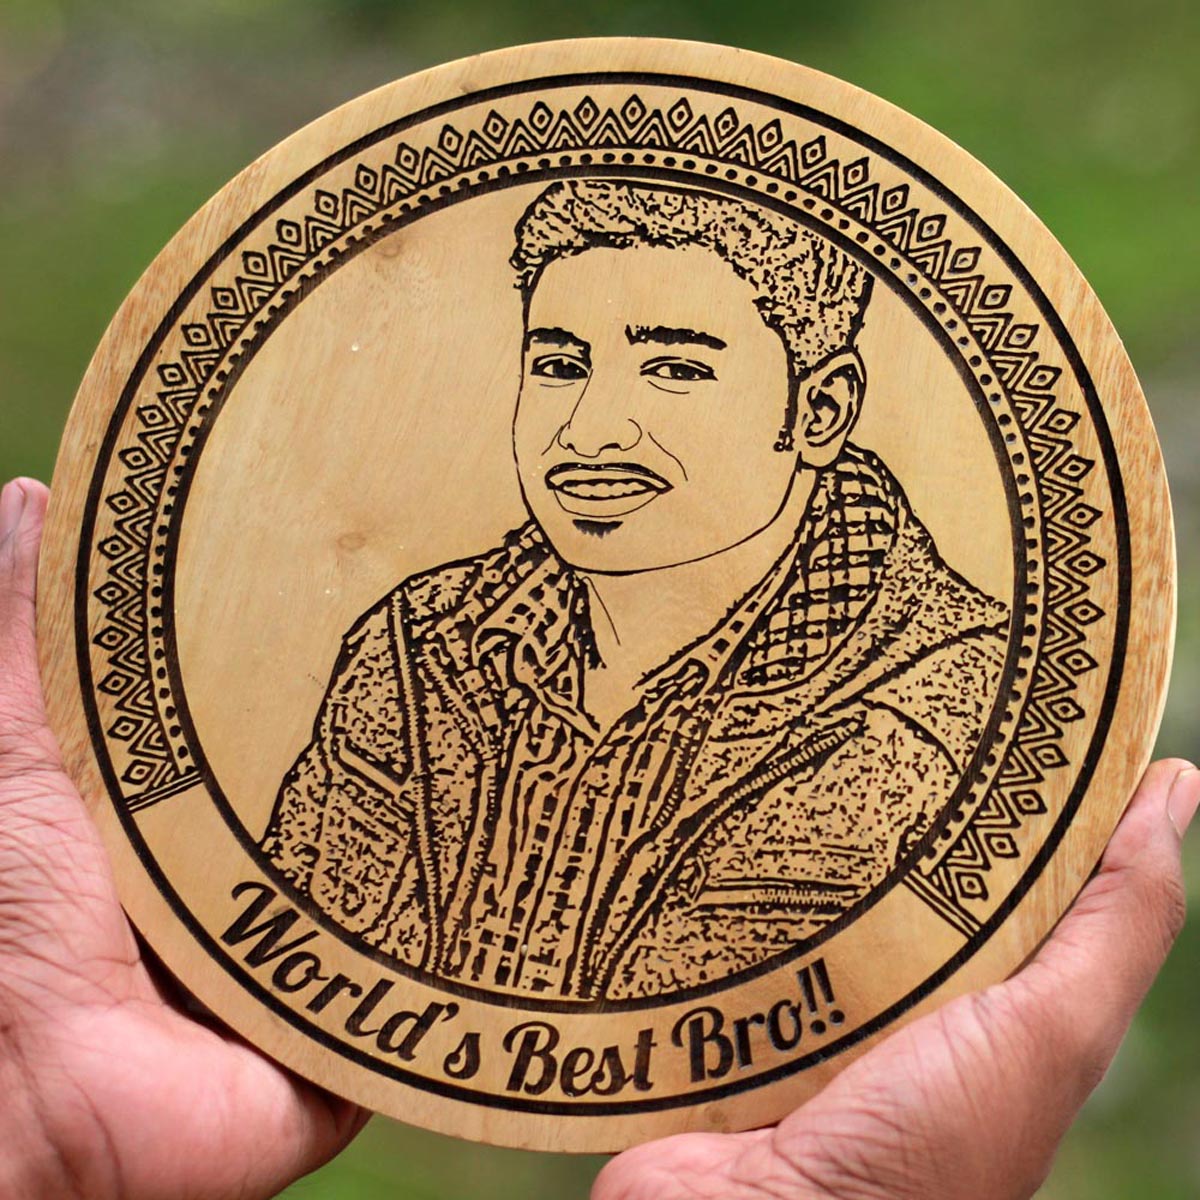 Custom Engraved Best Brother Wooden Frame. This Customized Photo Frame Makes The Best Rakhi Gift For Brother. Buy More Personalized Rakhi Gifts For Sister And Brother From The Woodgeek Store.